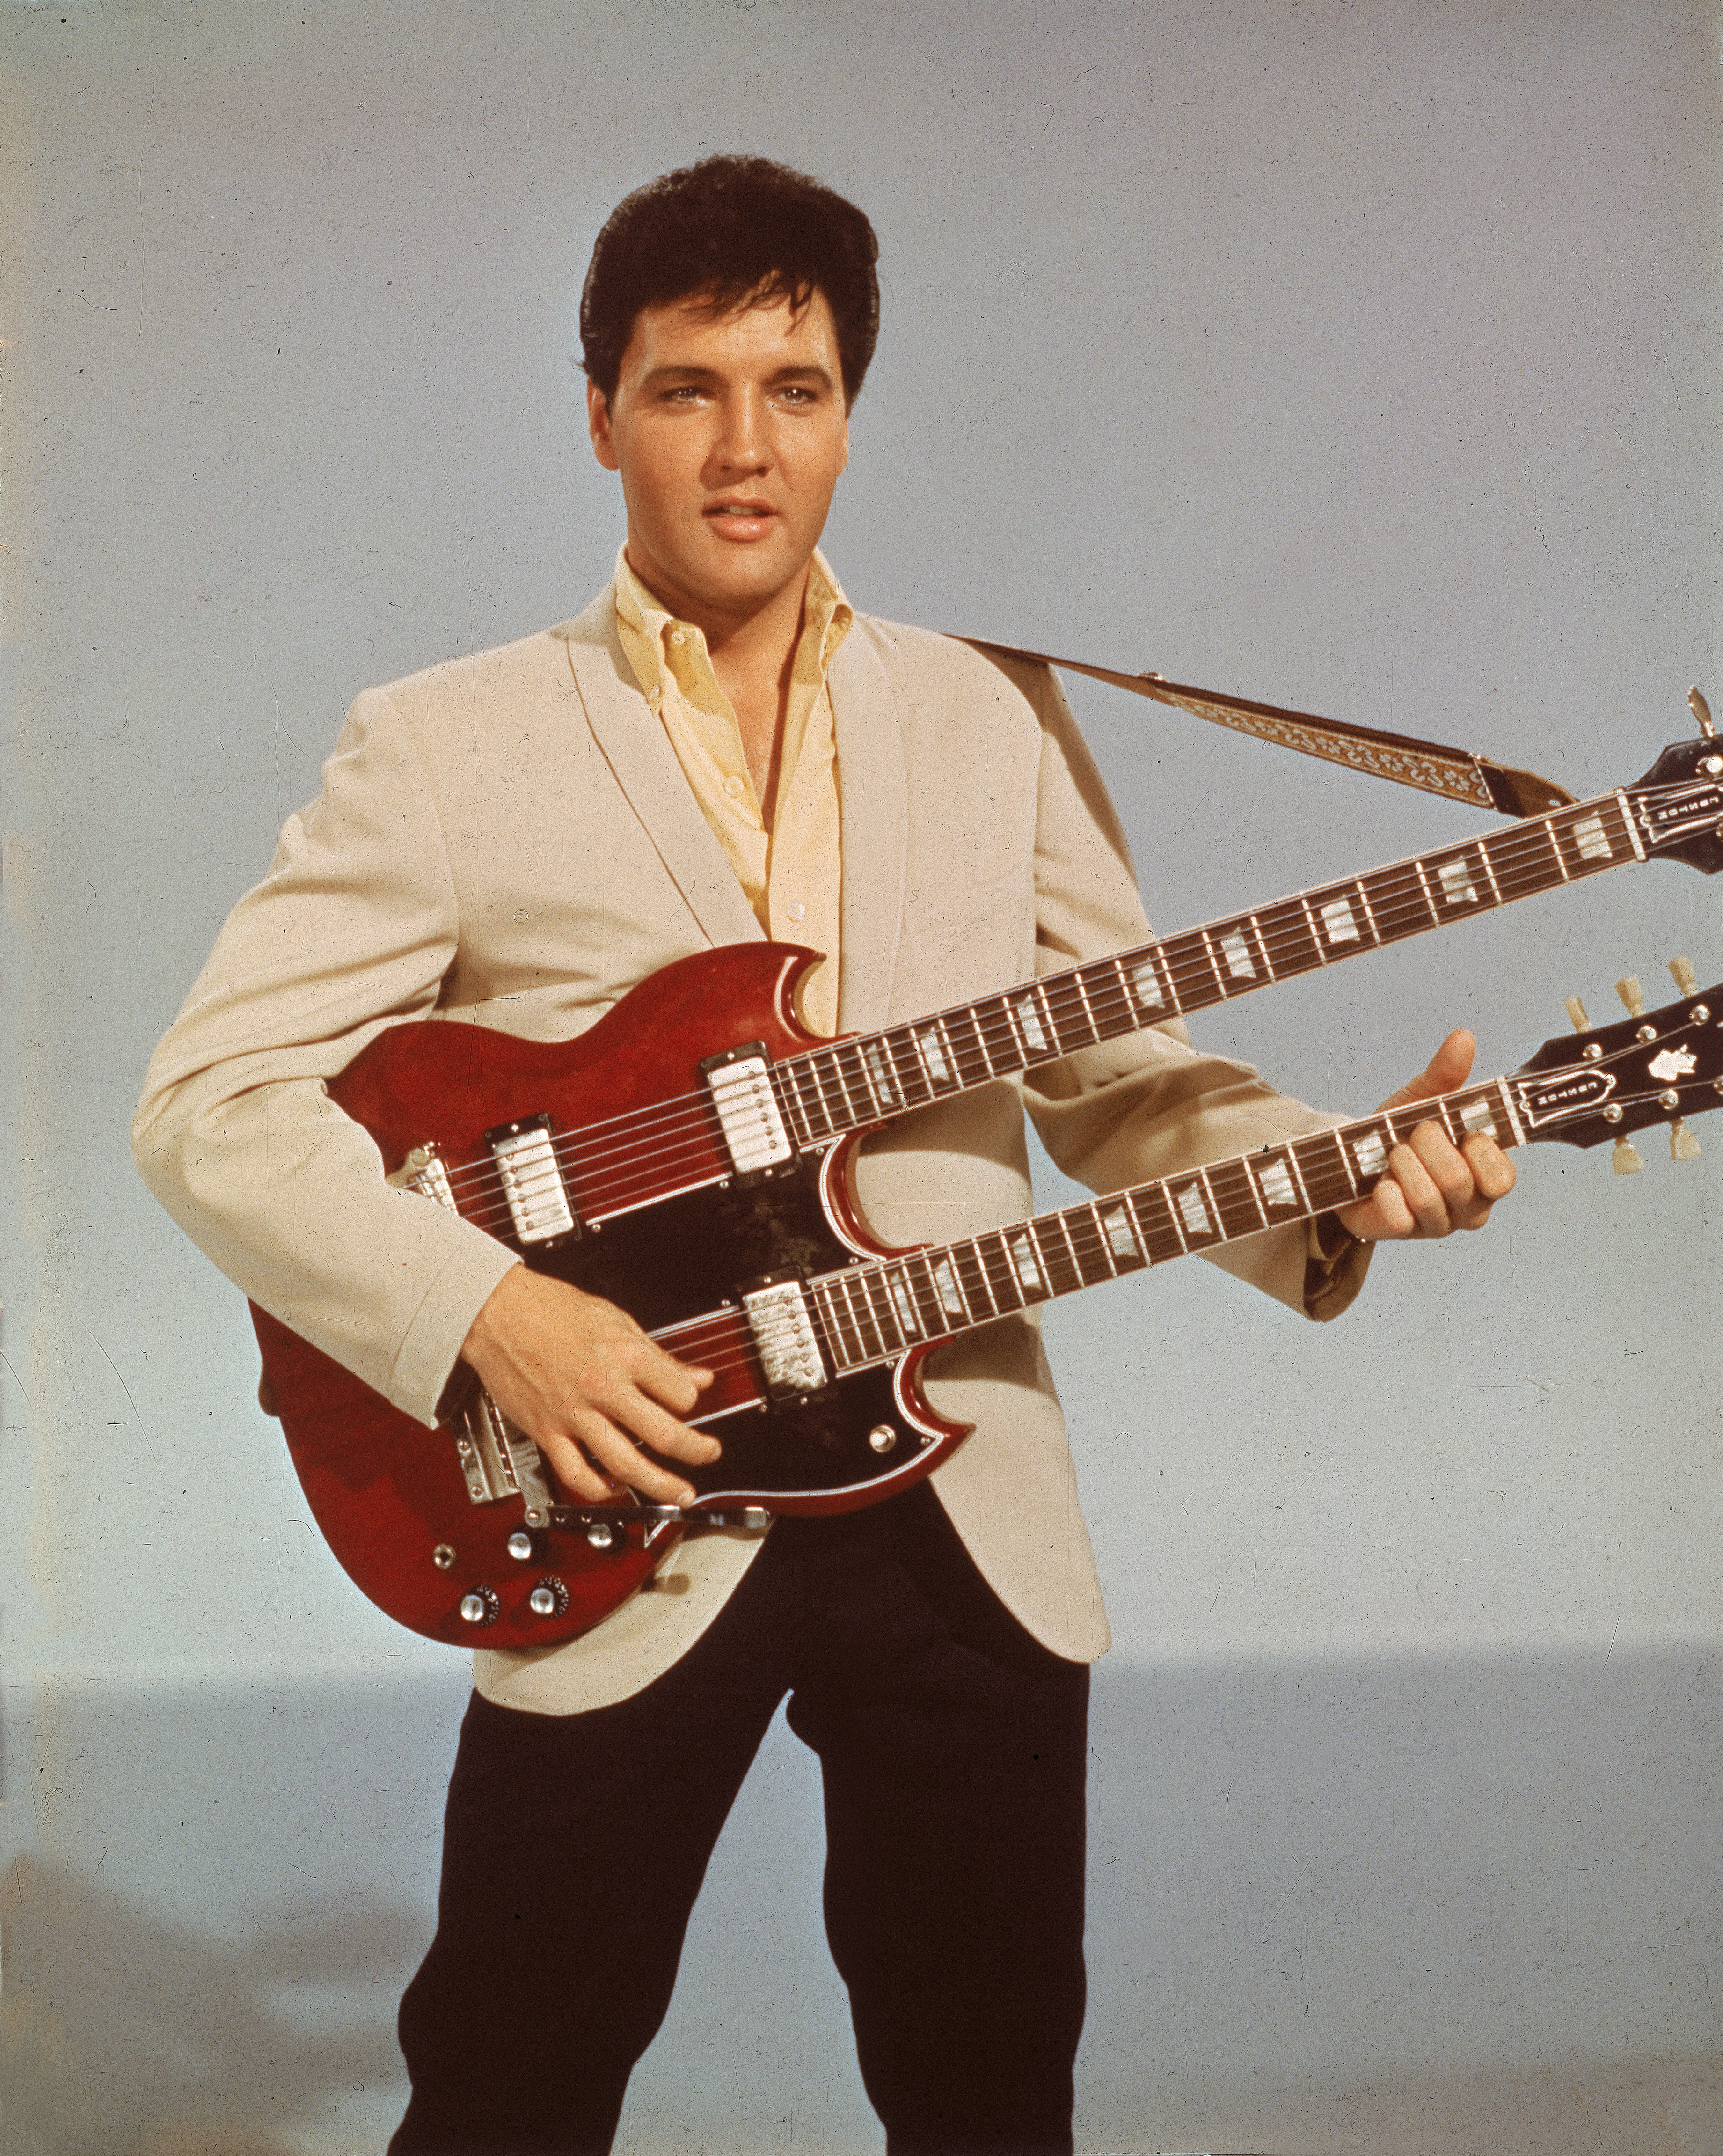 Portrait of American singer and actor Elvis Presley (1935 - 1977) as he holds a twelve string guitar, mid 1950s . (Photo by Hulton Archive/Getty Images)